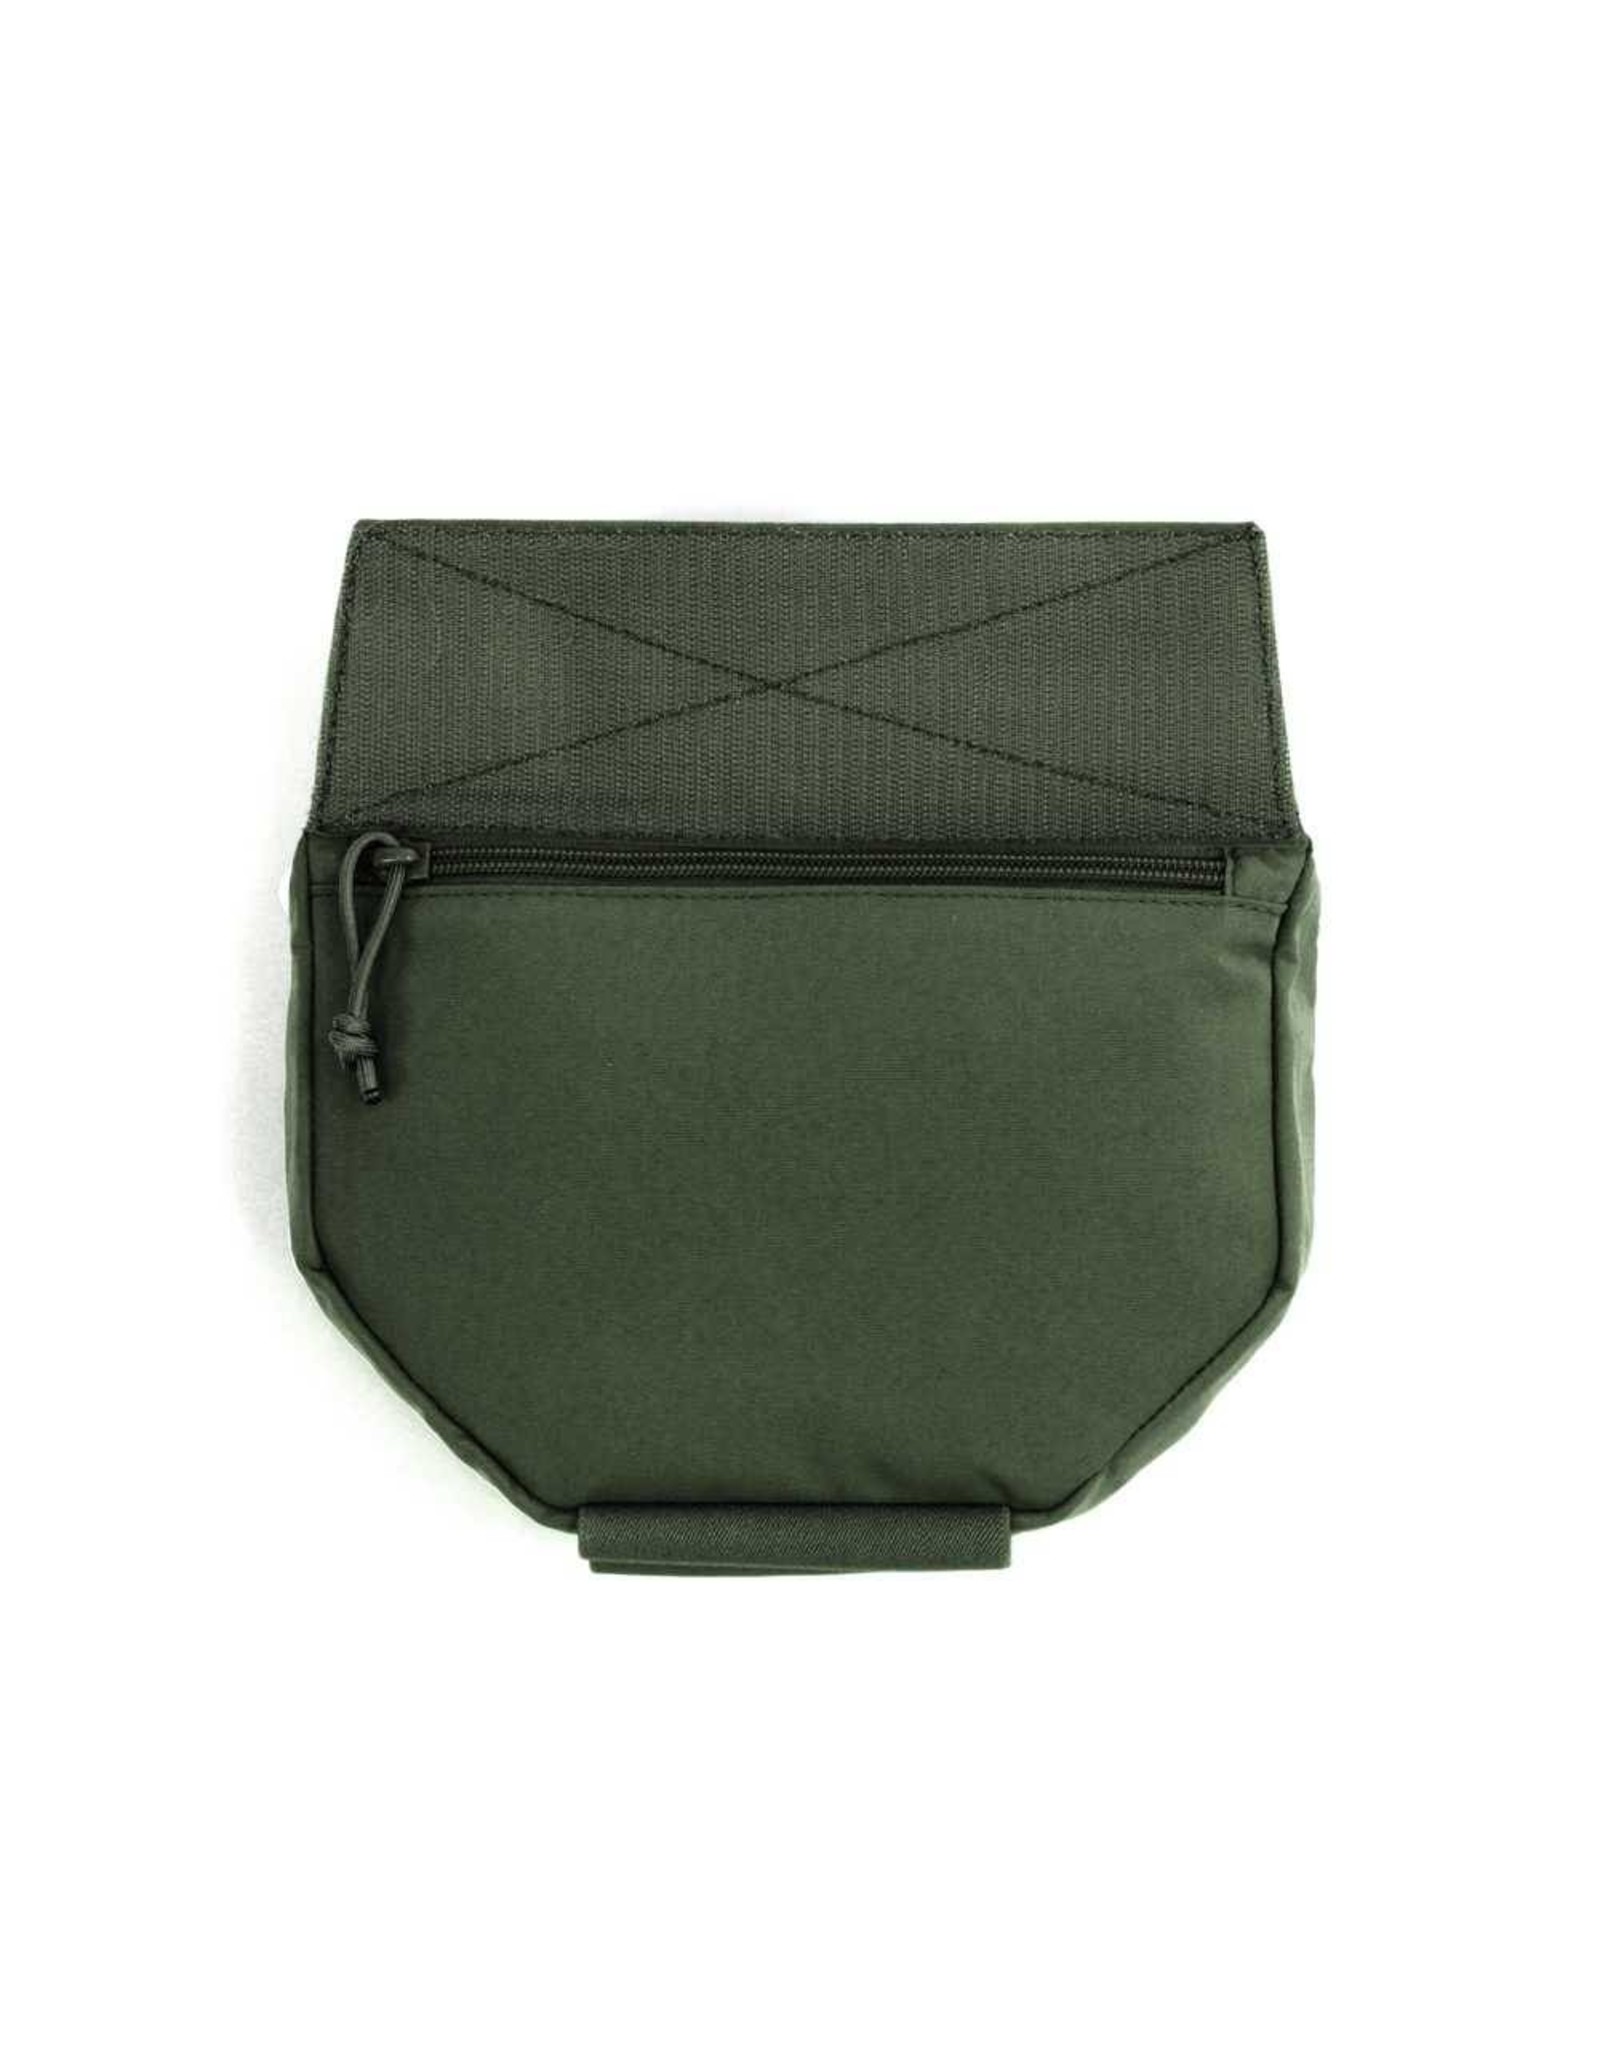 Warrior Drop Down Velcro Utility Pouch - Olive Drab